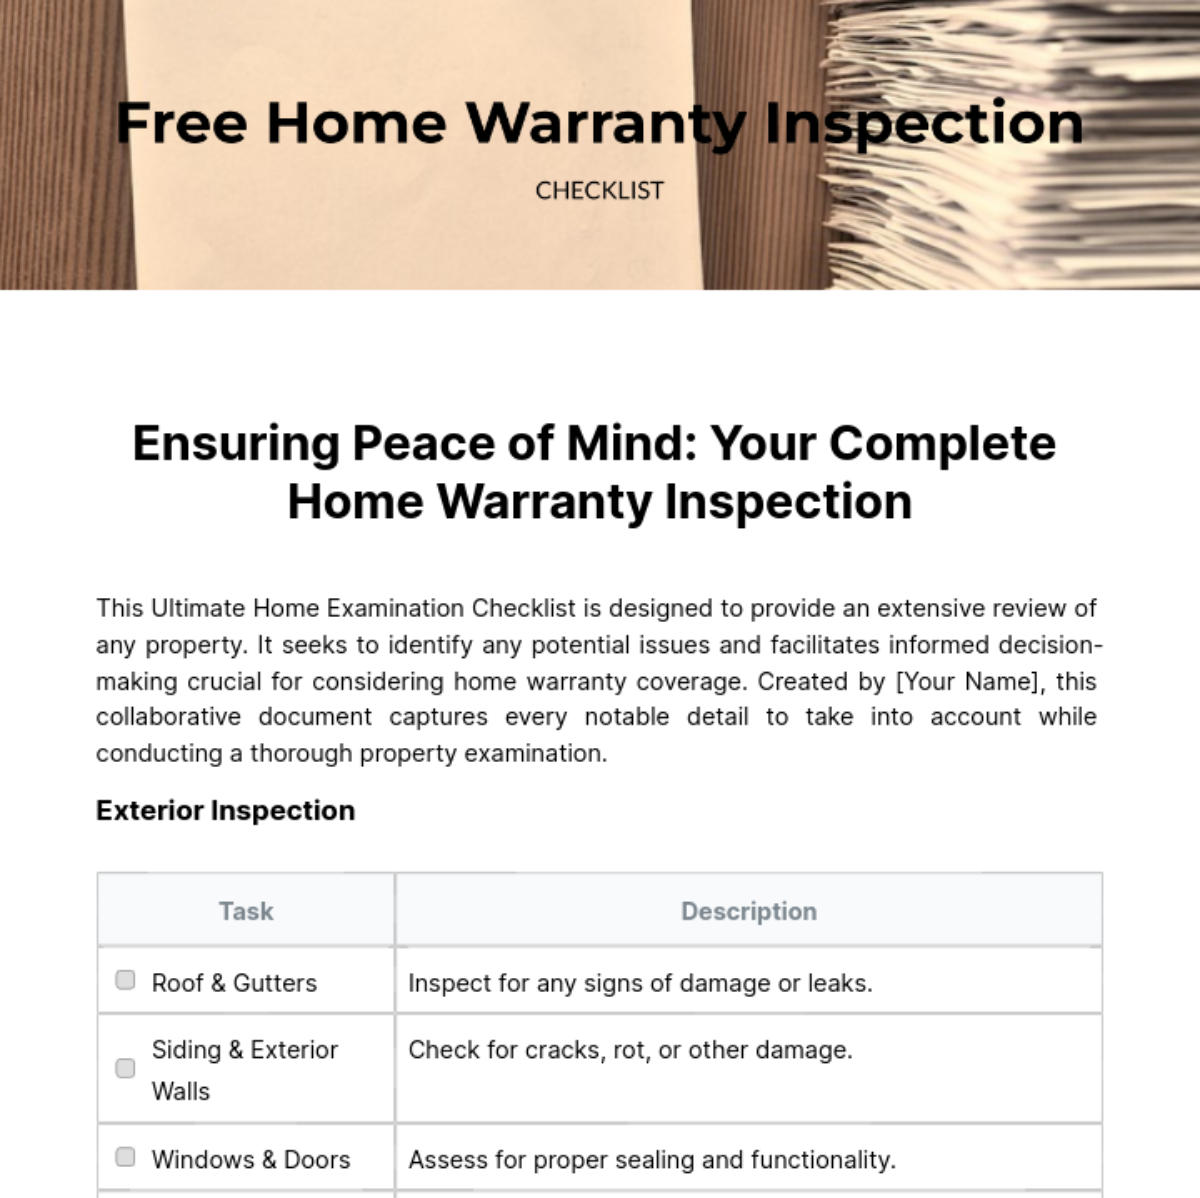 Free hHome Warranty Inspection Checklist Template